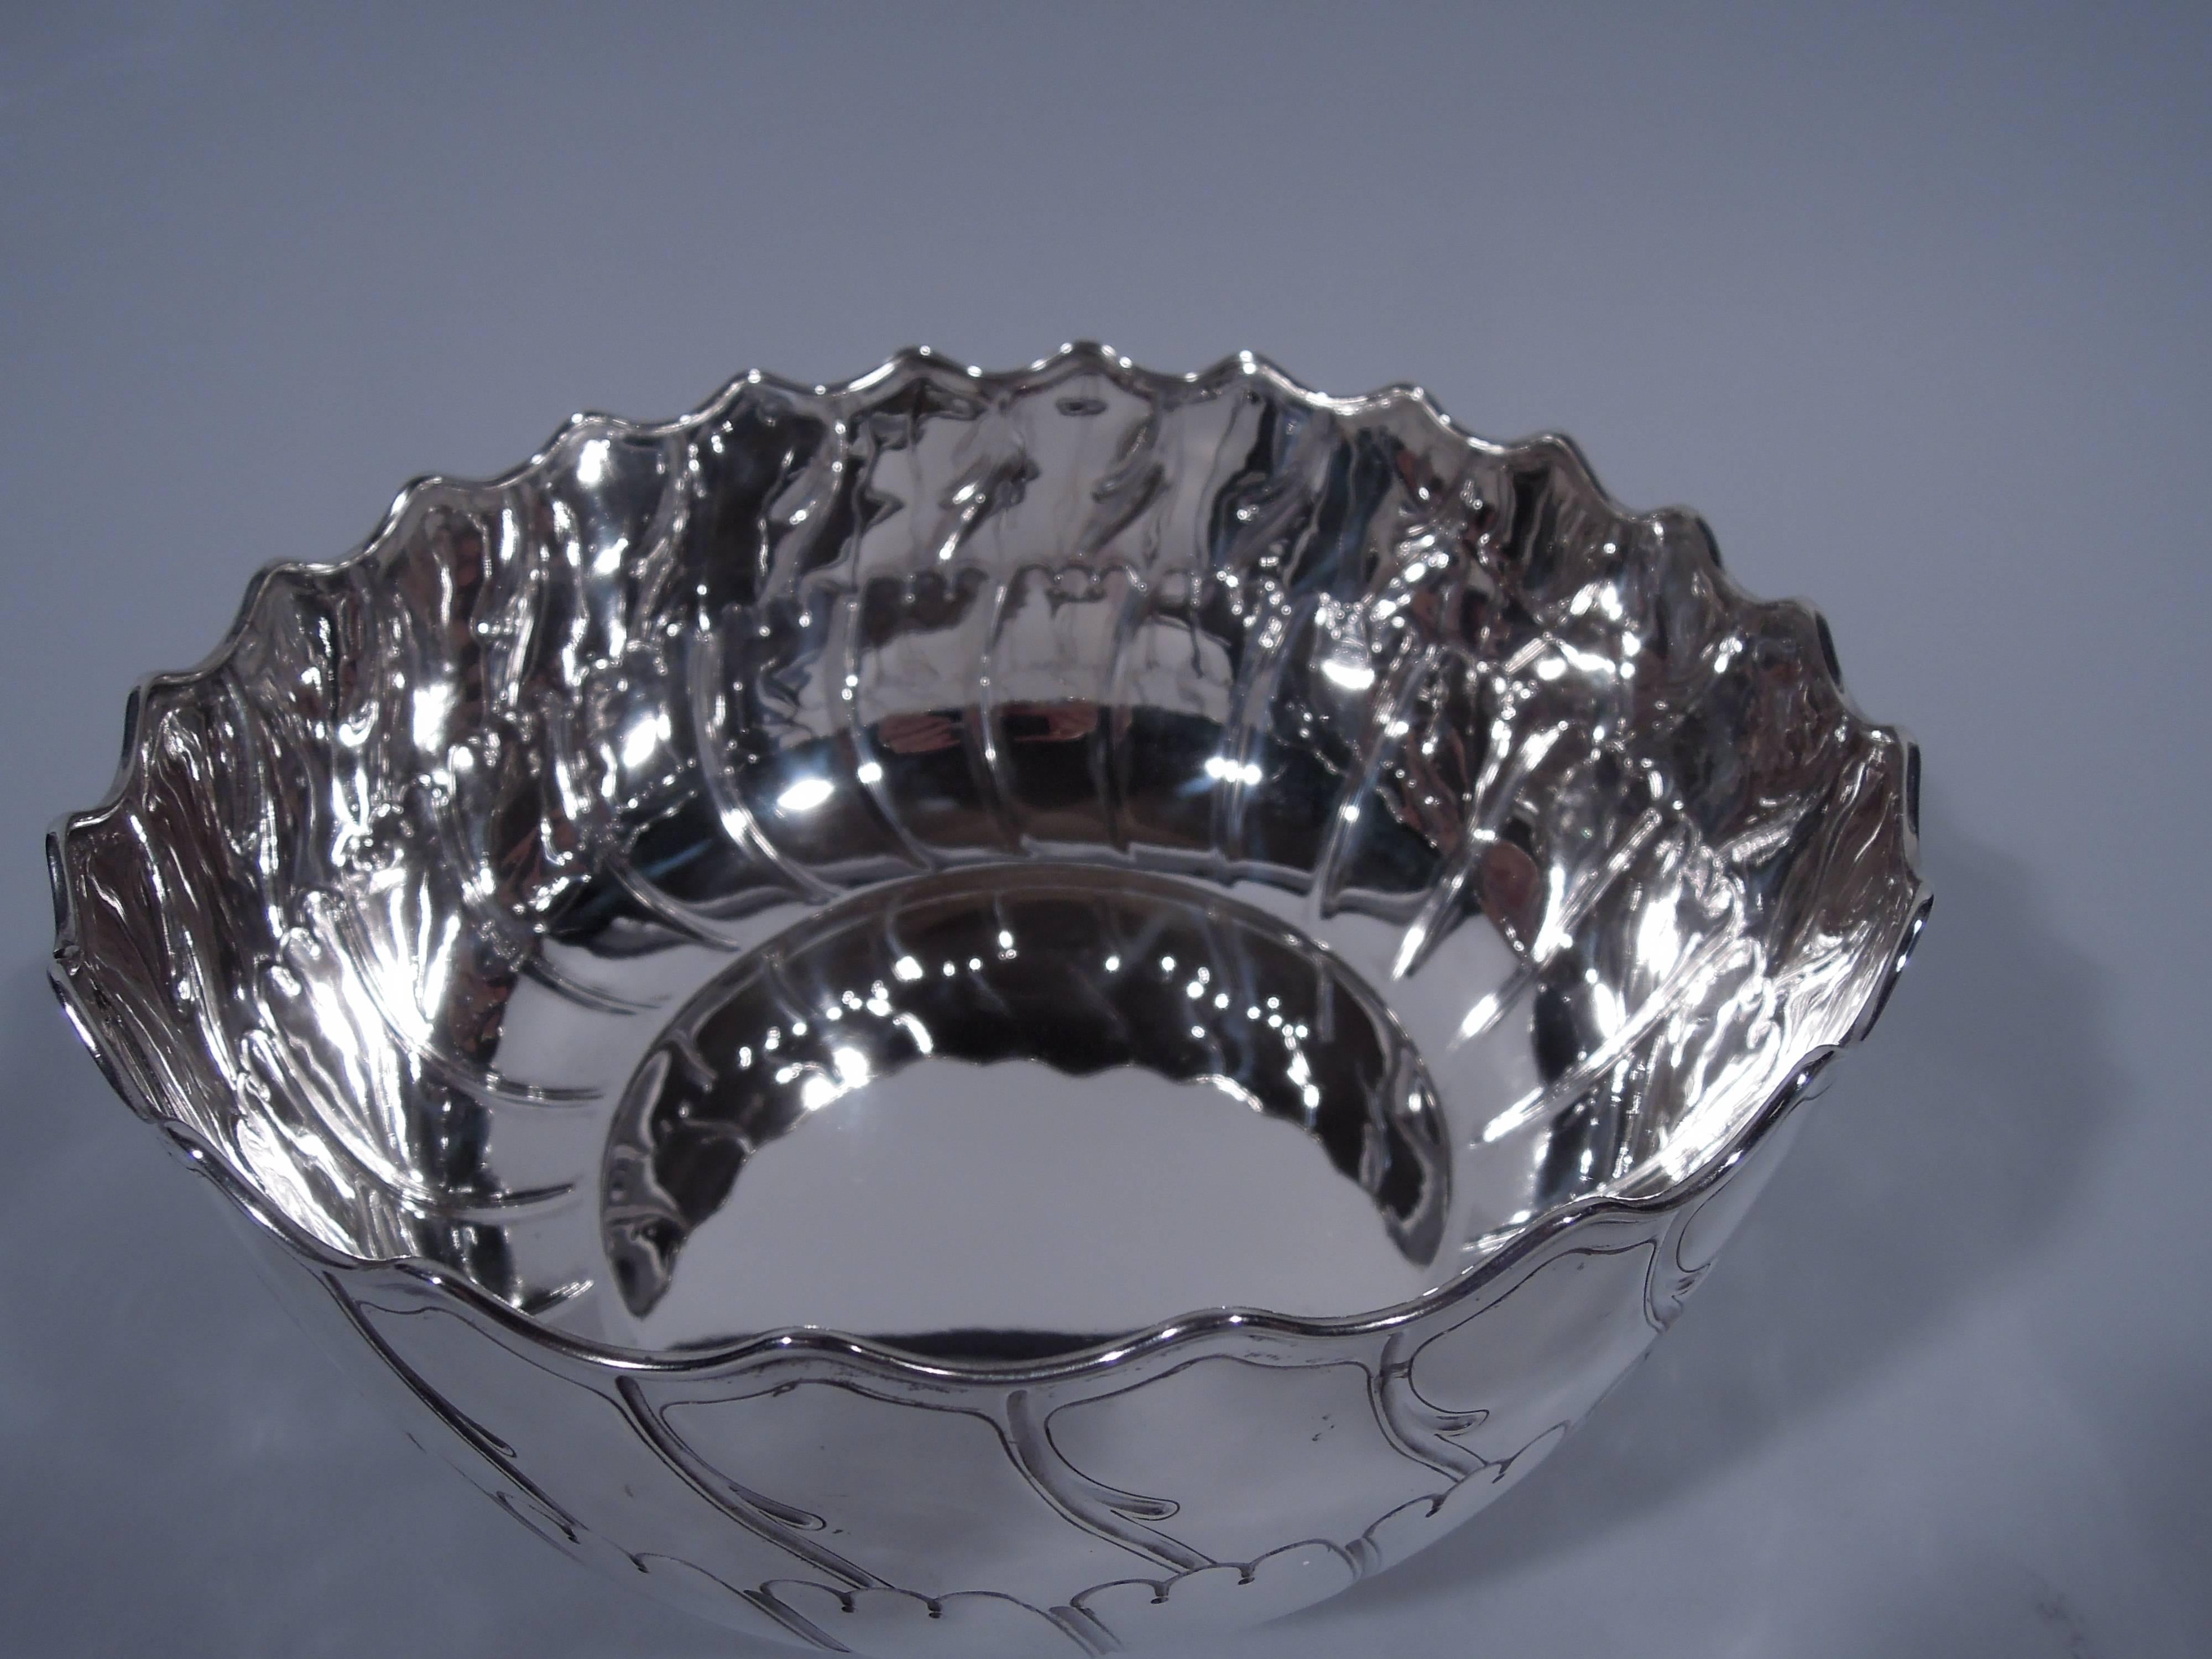 Victorian sterling silver bowl. Made by Edgar Finley and Hugh Taylor in London in 1891. Curved sides, wavy and molded rim, and short foot. Wave ornament incised to sides exterior. A dynamic turn-of-the-century design. Hallmark includes registration